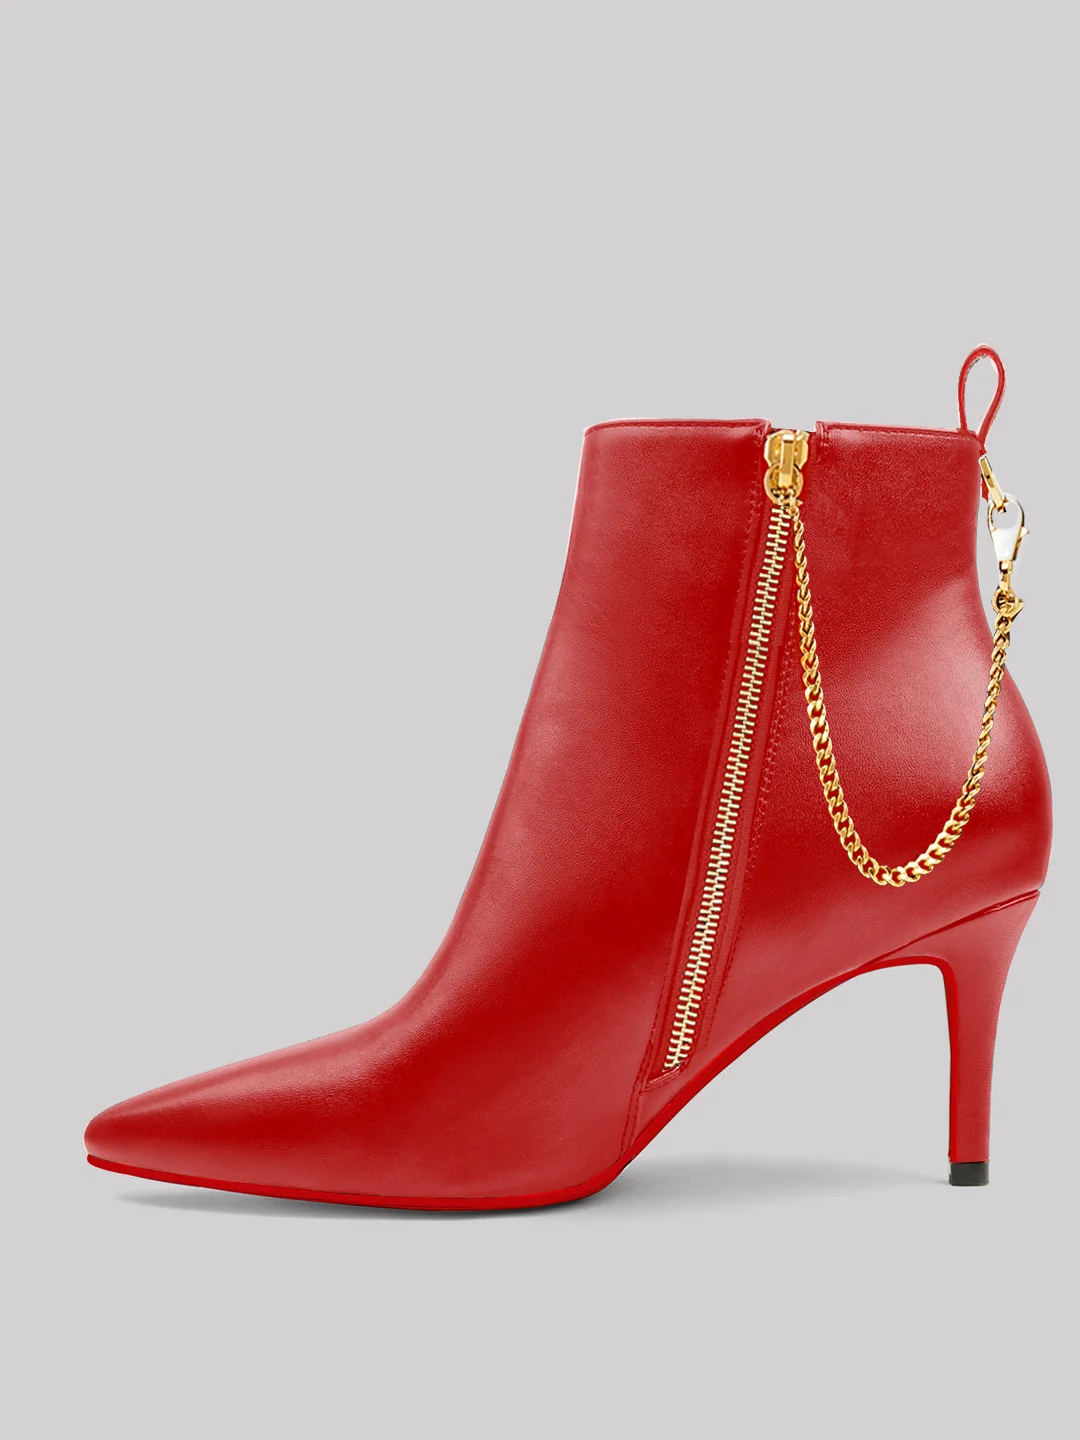 2.3 Inch Women's Chain Ankle Boots Closed Pointed Toe Red bottom  Stiletto Booties